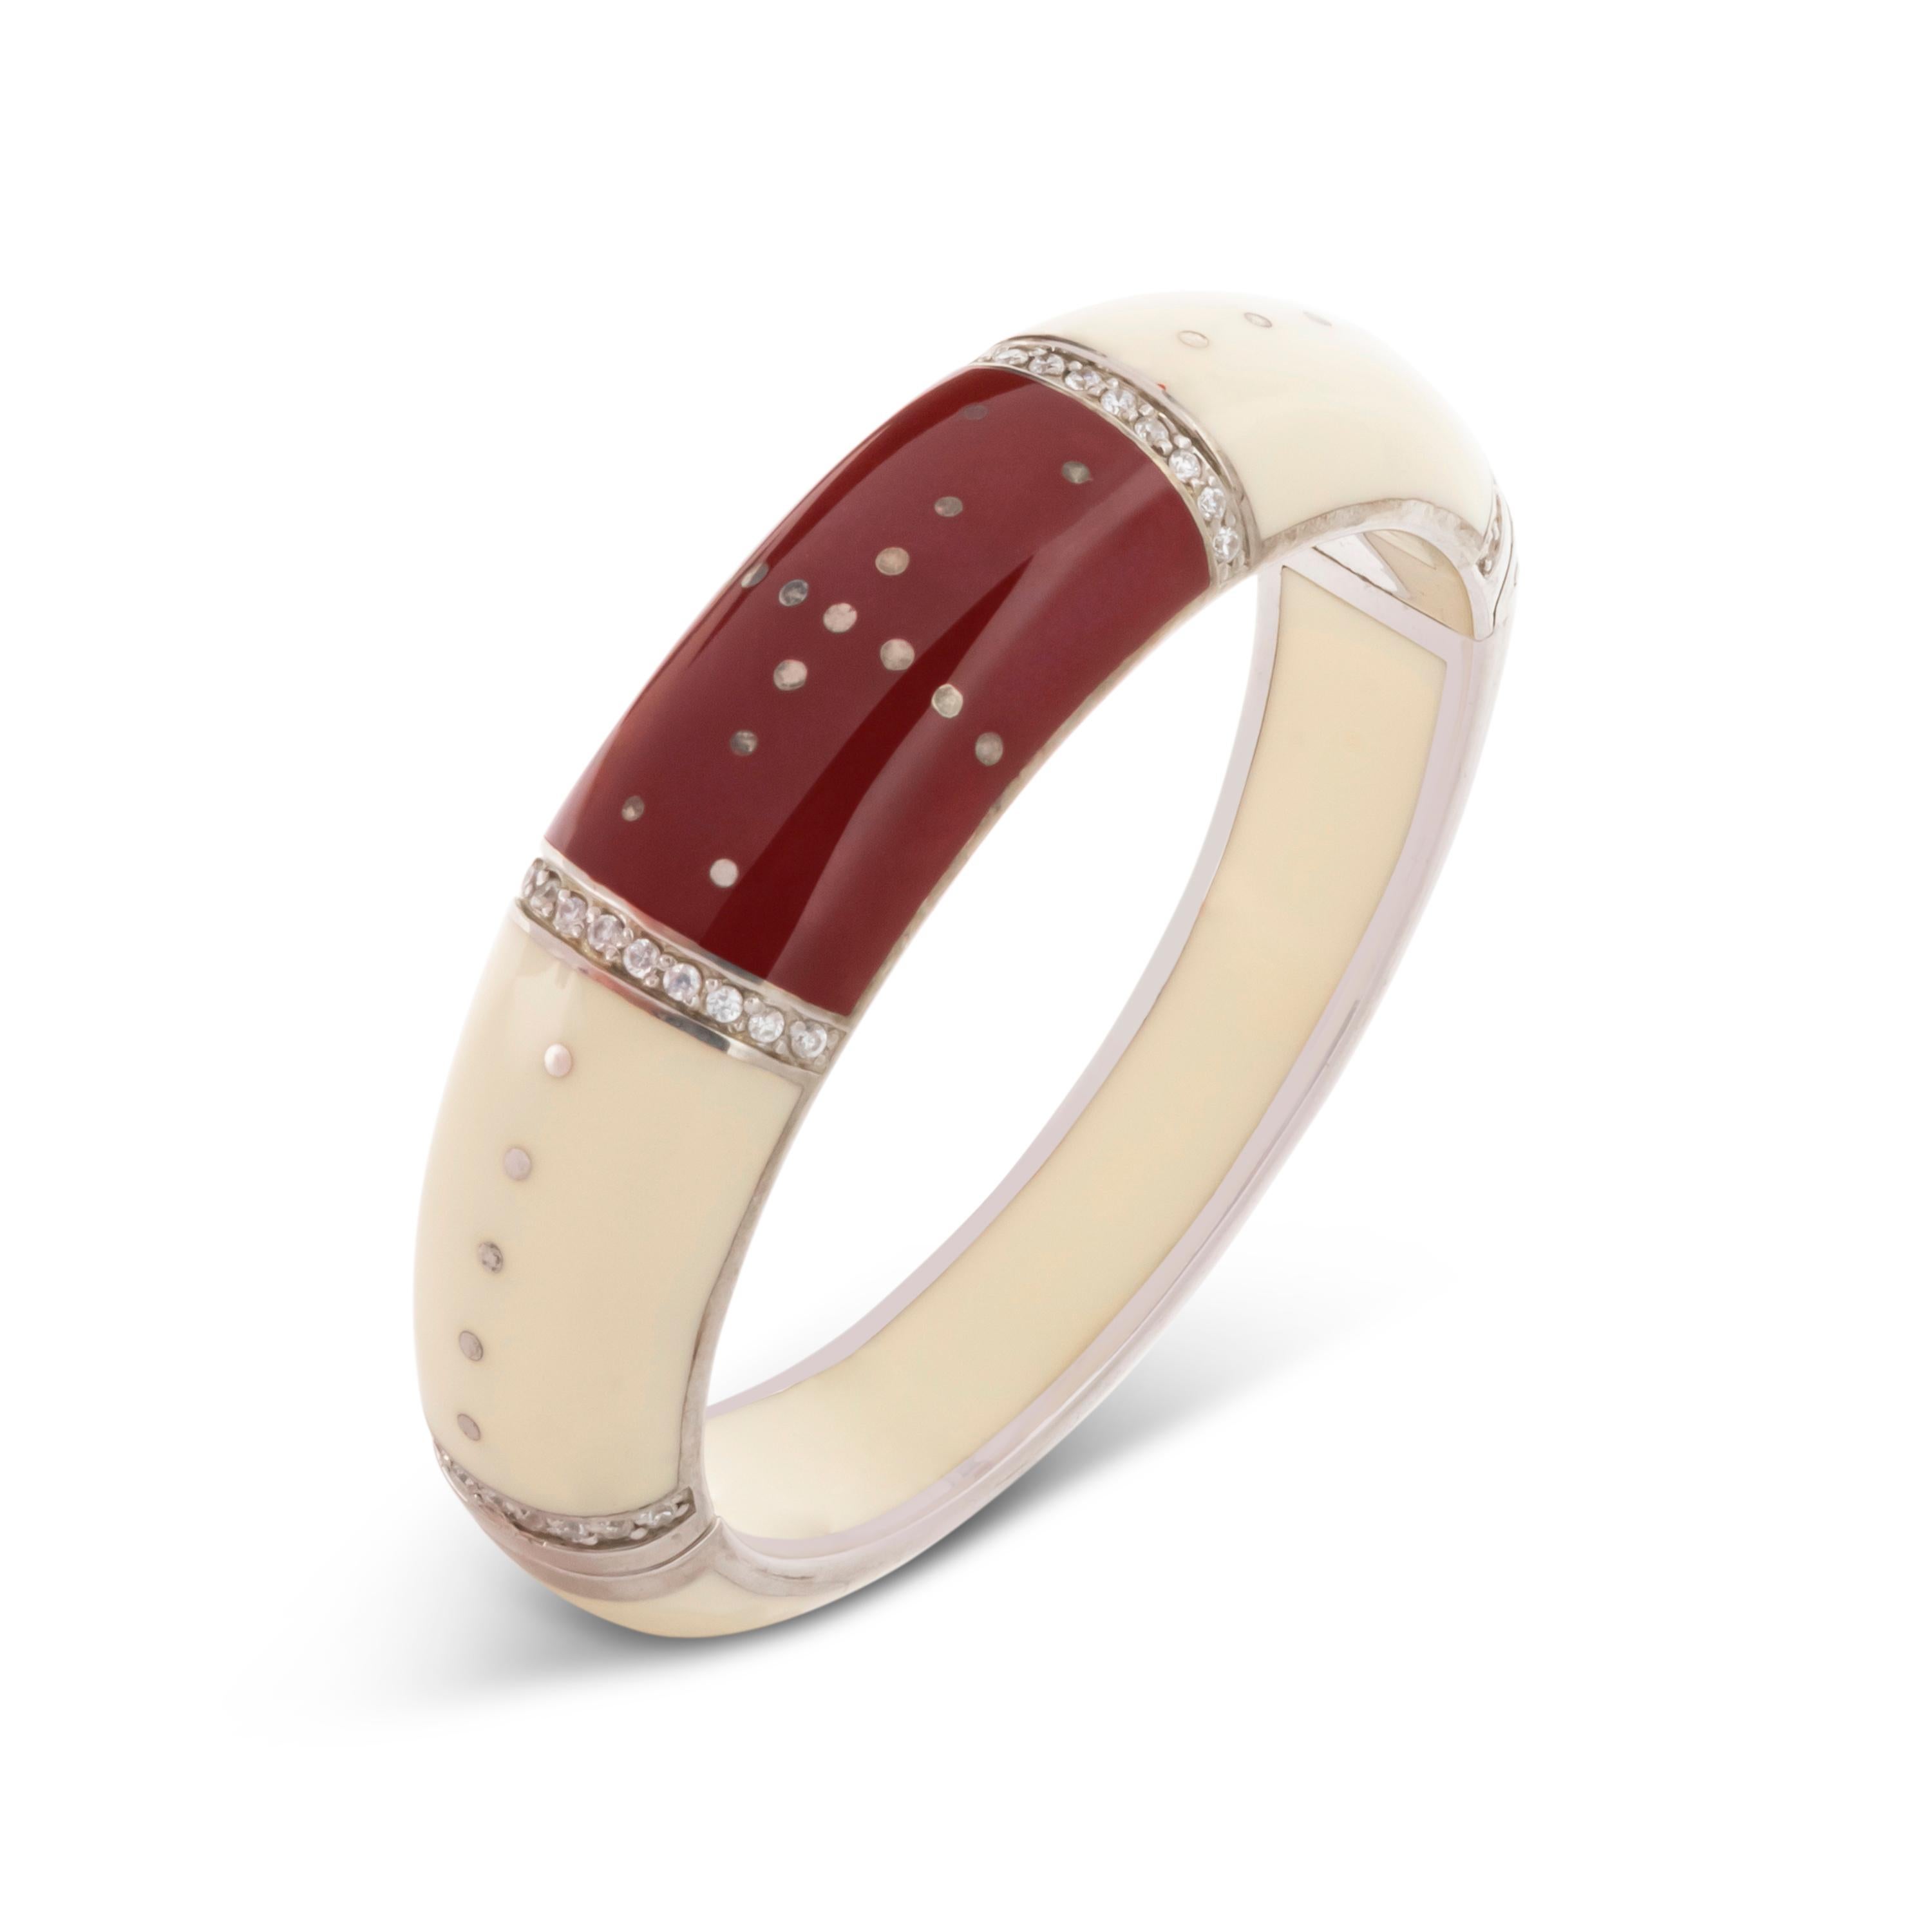 Fantastic Art Deco - Miriam Salat (MIRIM) bangle features cream / Ivory and wine bottle color resin with sterling silver
Brilliant cut full facet white topaz, prong set by hand. 
Bangle has a magnetic closure; measures apx. 6-1/2 inches in